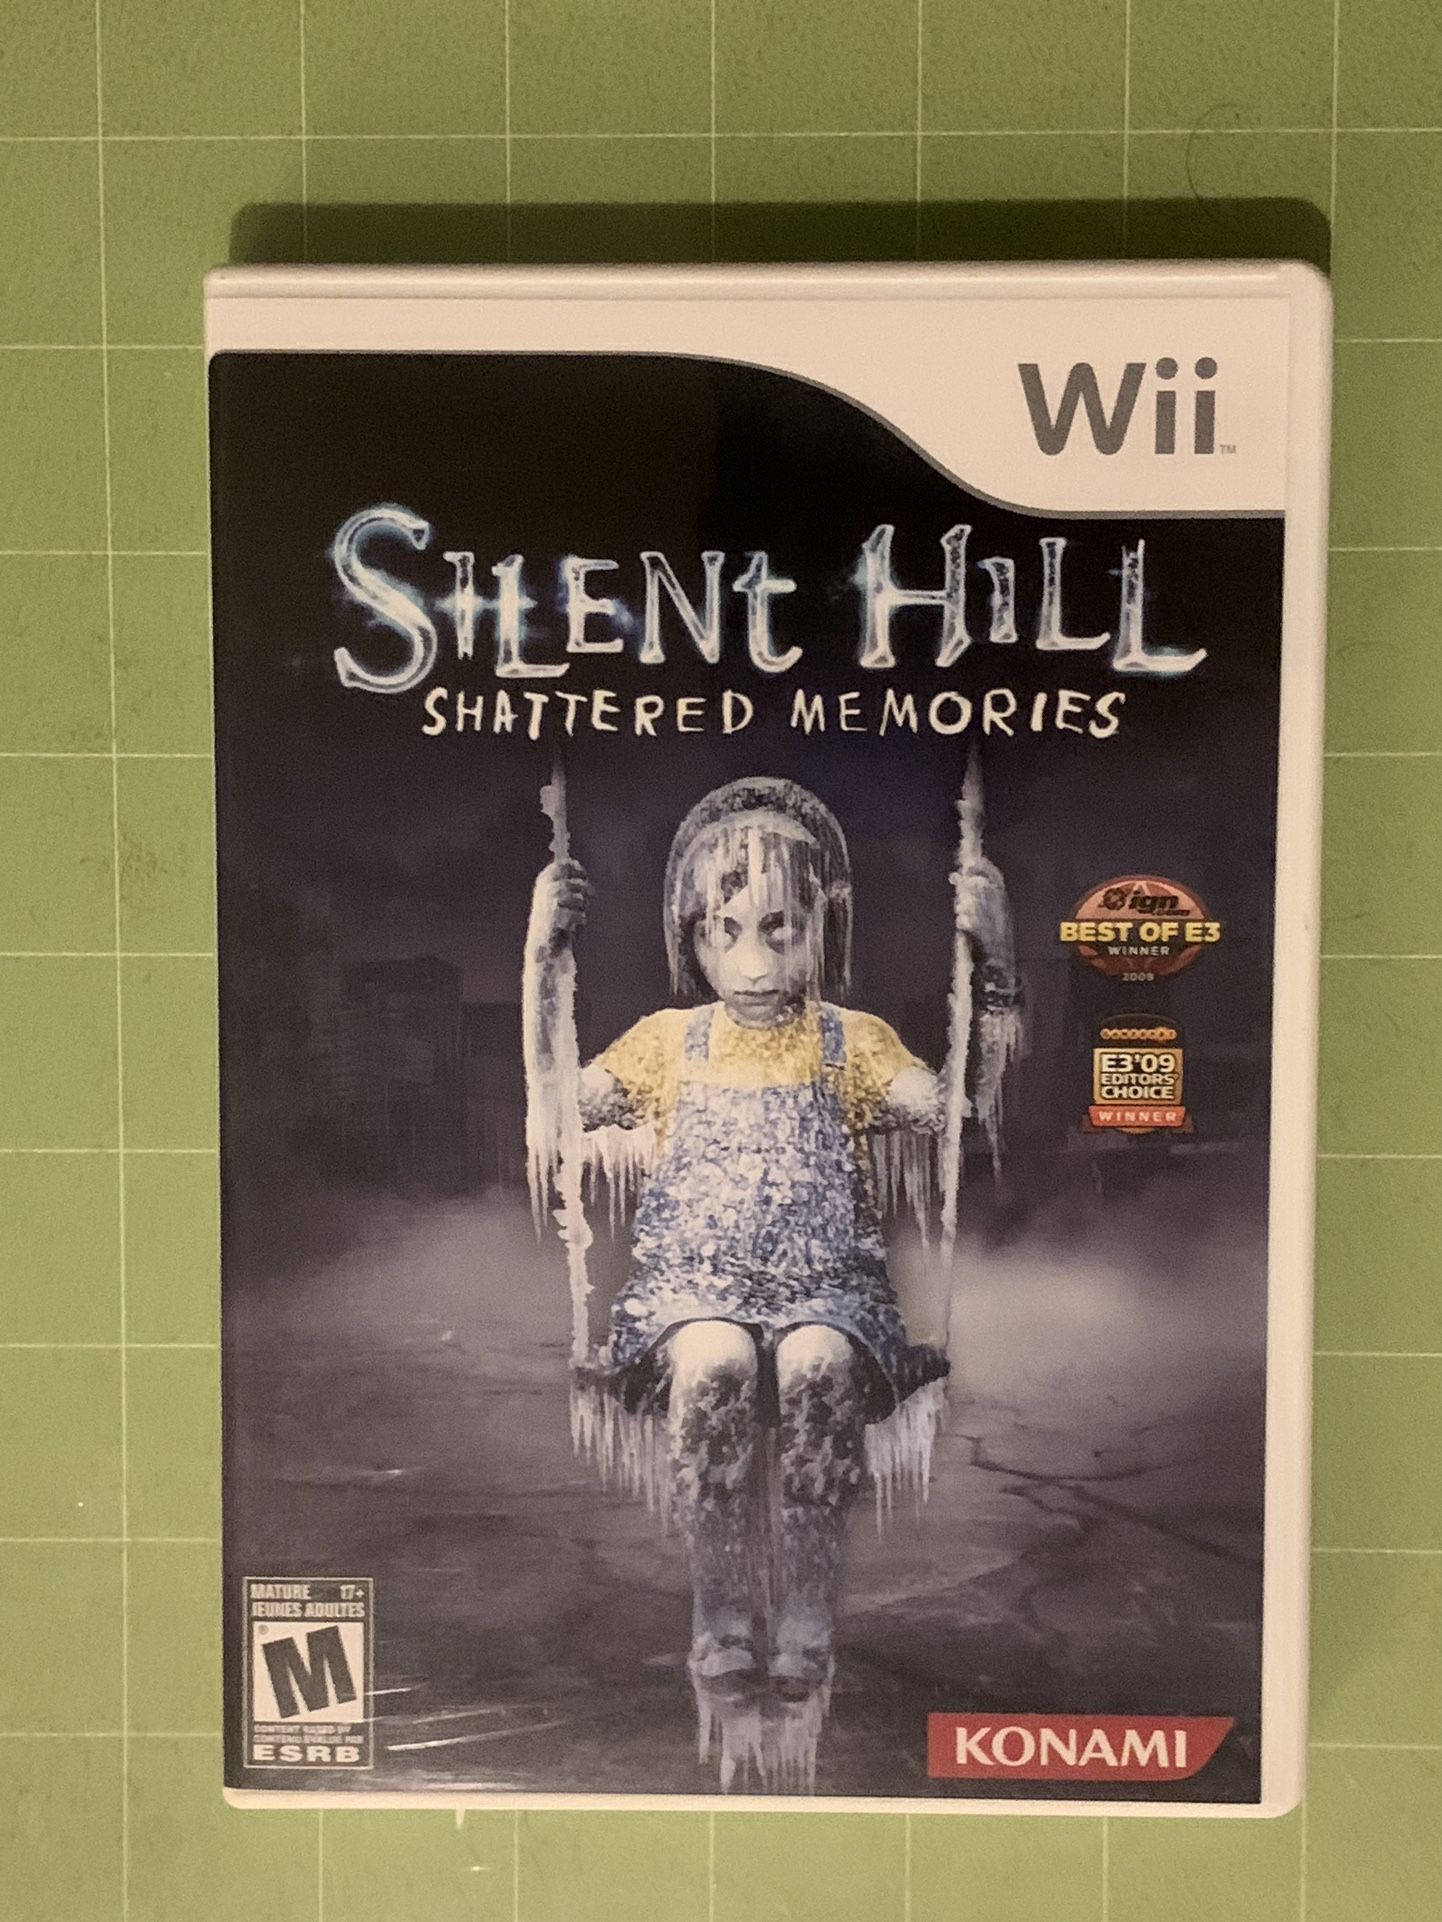 Silent Hill Shattered Memories for the wii 